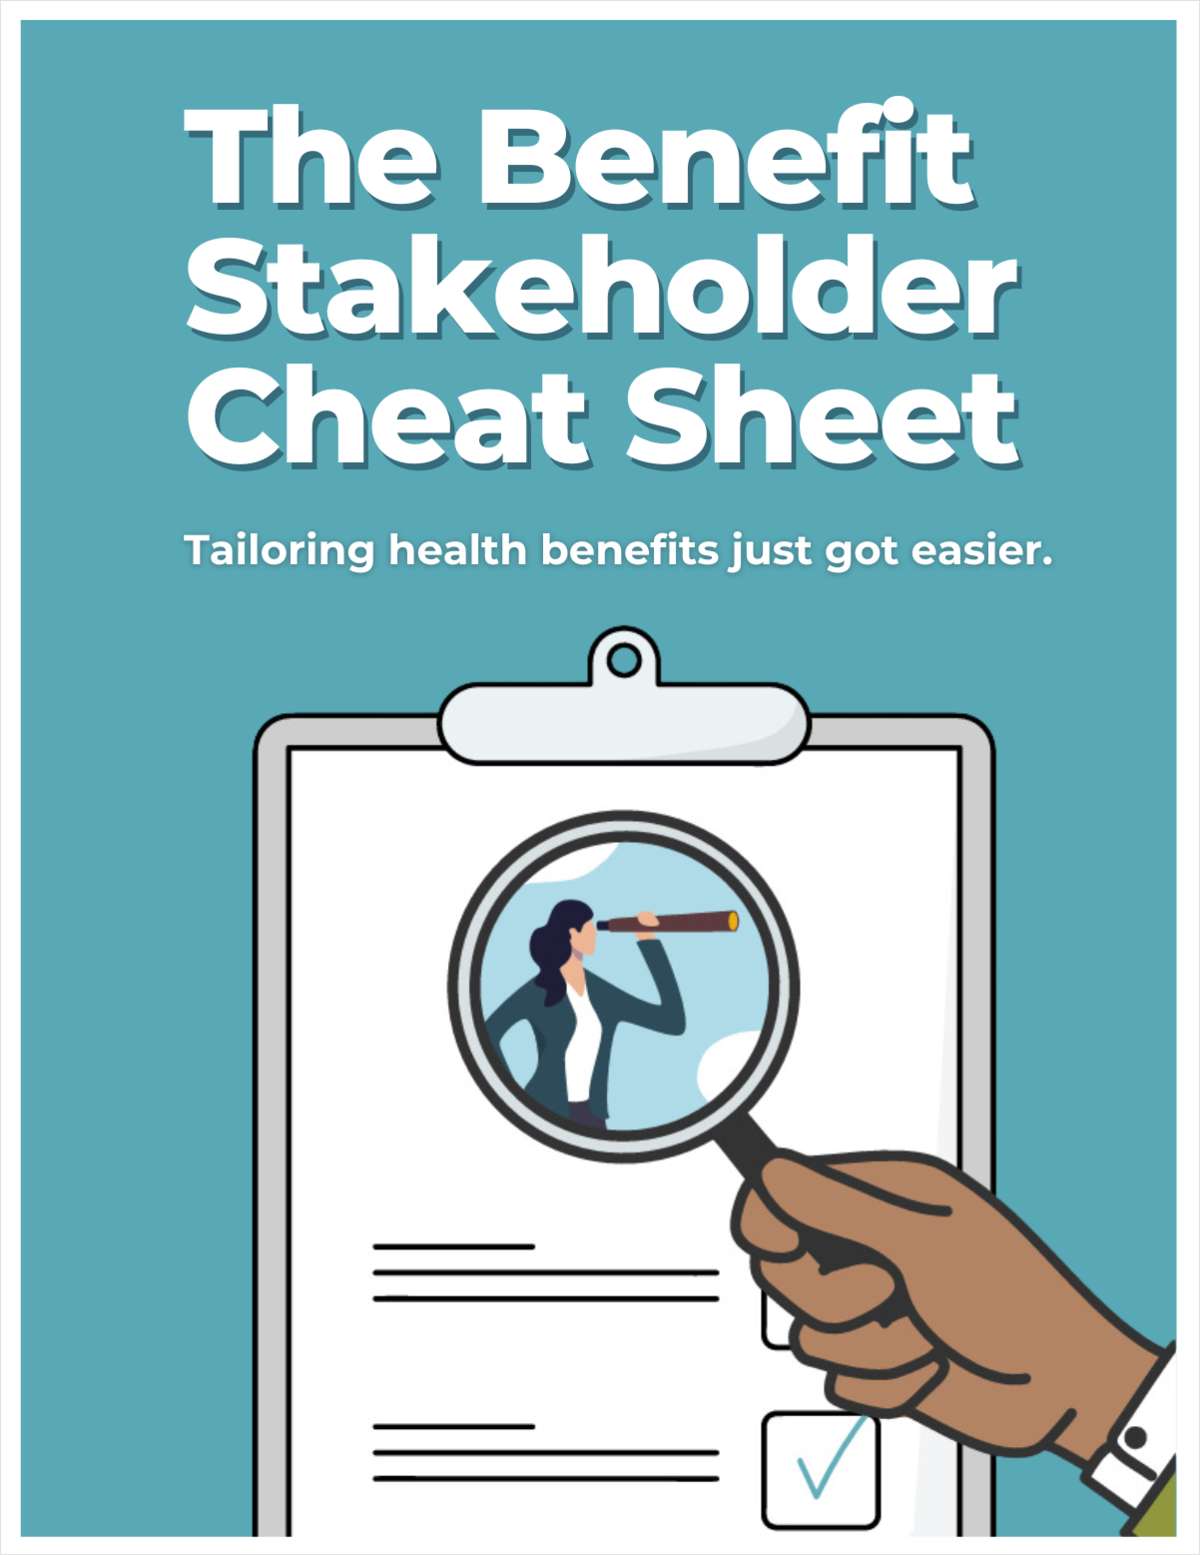 The Benefit Stakeholder Cheat Sheet: Insights for Brokers to Engage CEOs, CFOs, and HR Leaders link